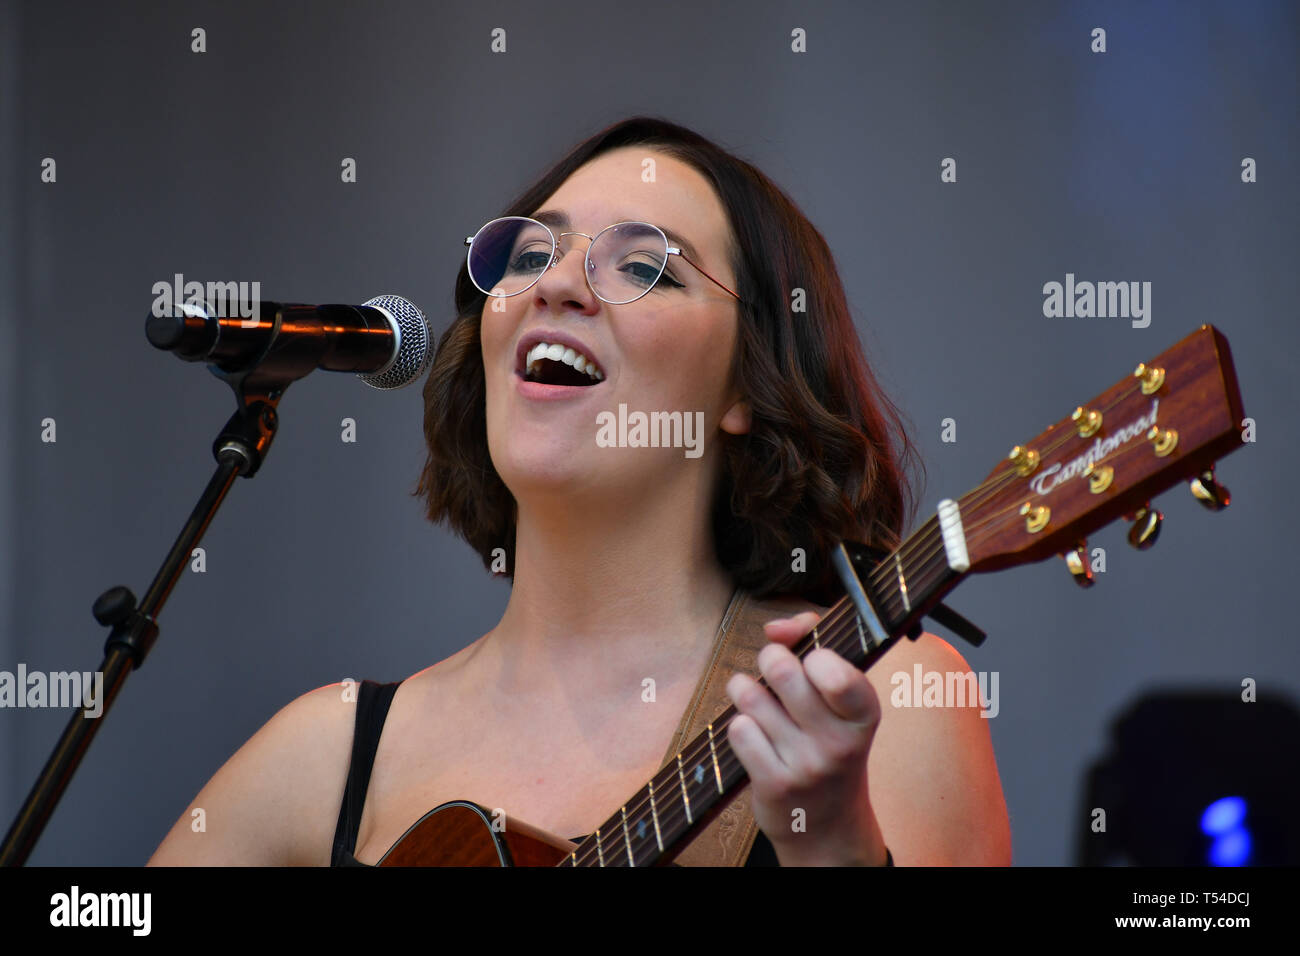 London, UK. 20th April, 2019.Basking in London - Lucy May Walker performs Lydia Bright presenter at the Feast of St George to celebrate English culture with music and English food stalls in Trafalgar Square on 20 April 2019, London, UK. Credit: Picture Capital/Alamy Live News Stock Photo